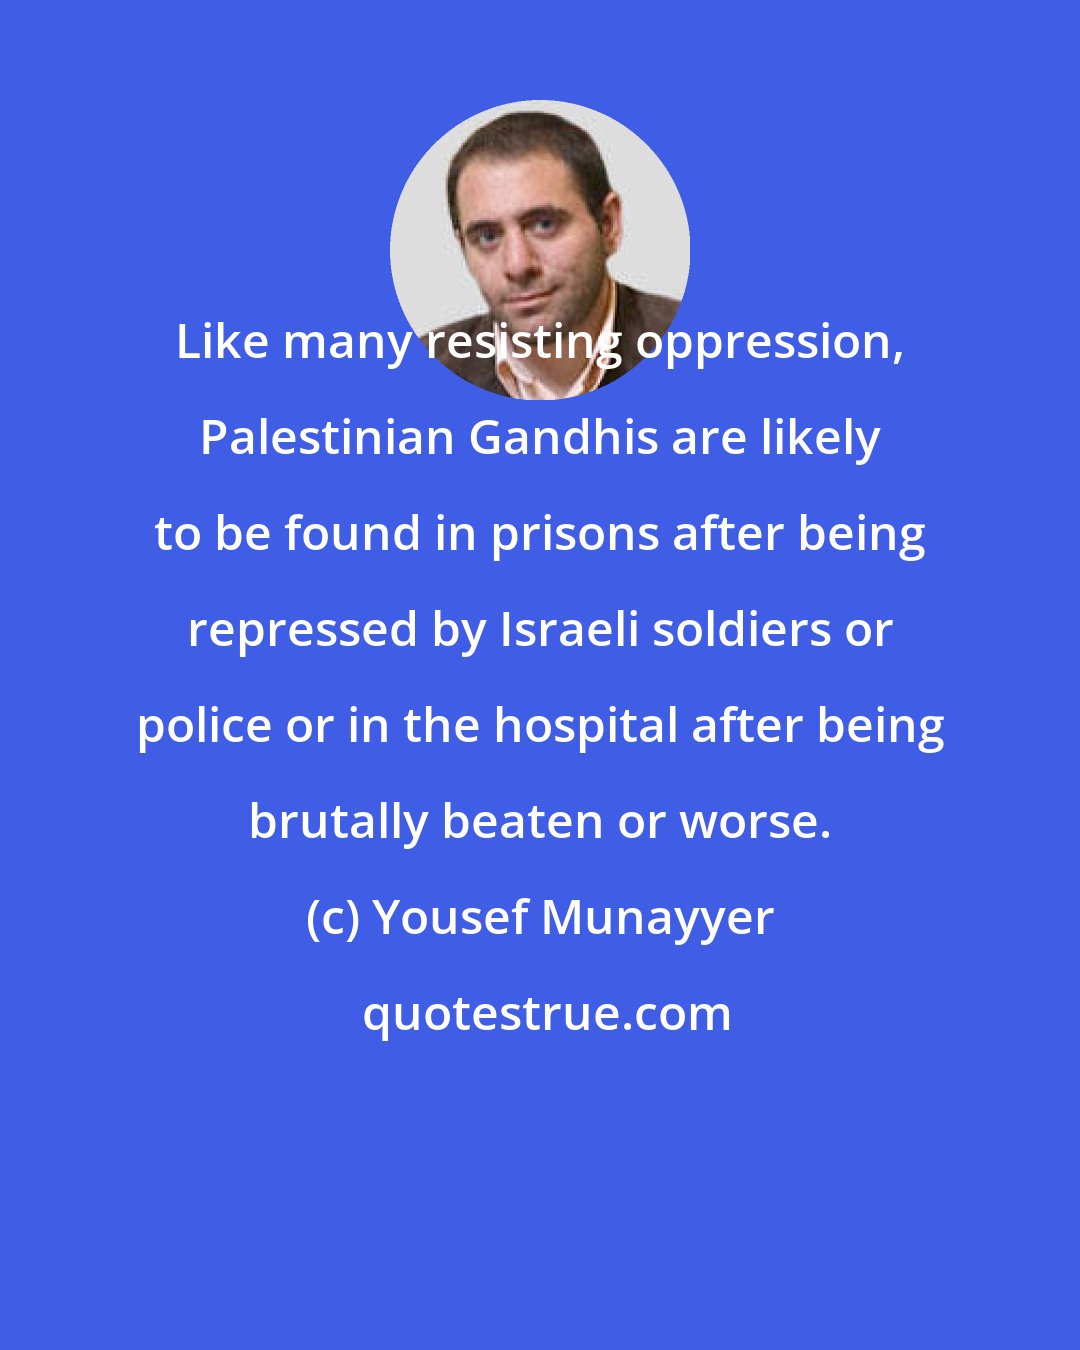 Yousef Munayyer: Like many resisting oppression, Palestinian Gandhis are likely to be found in prisons after being repressed by Israeli soldiers or police or in the hospital after being brutally beaten or worse.